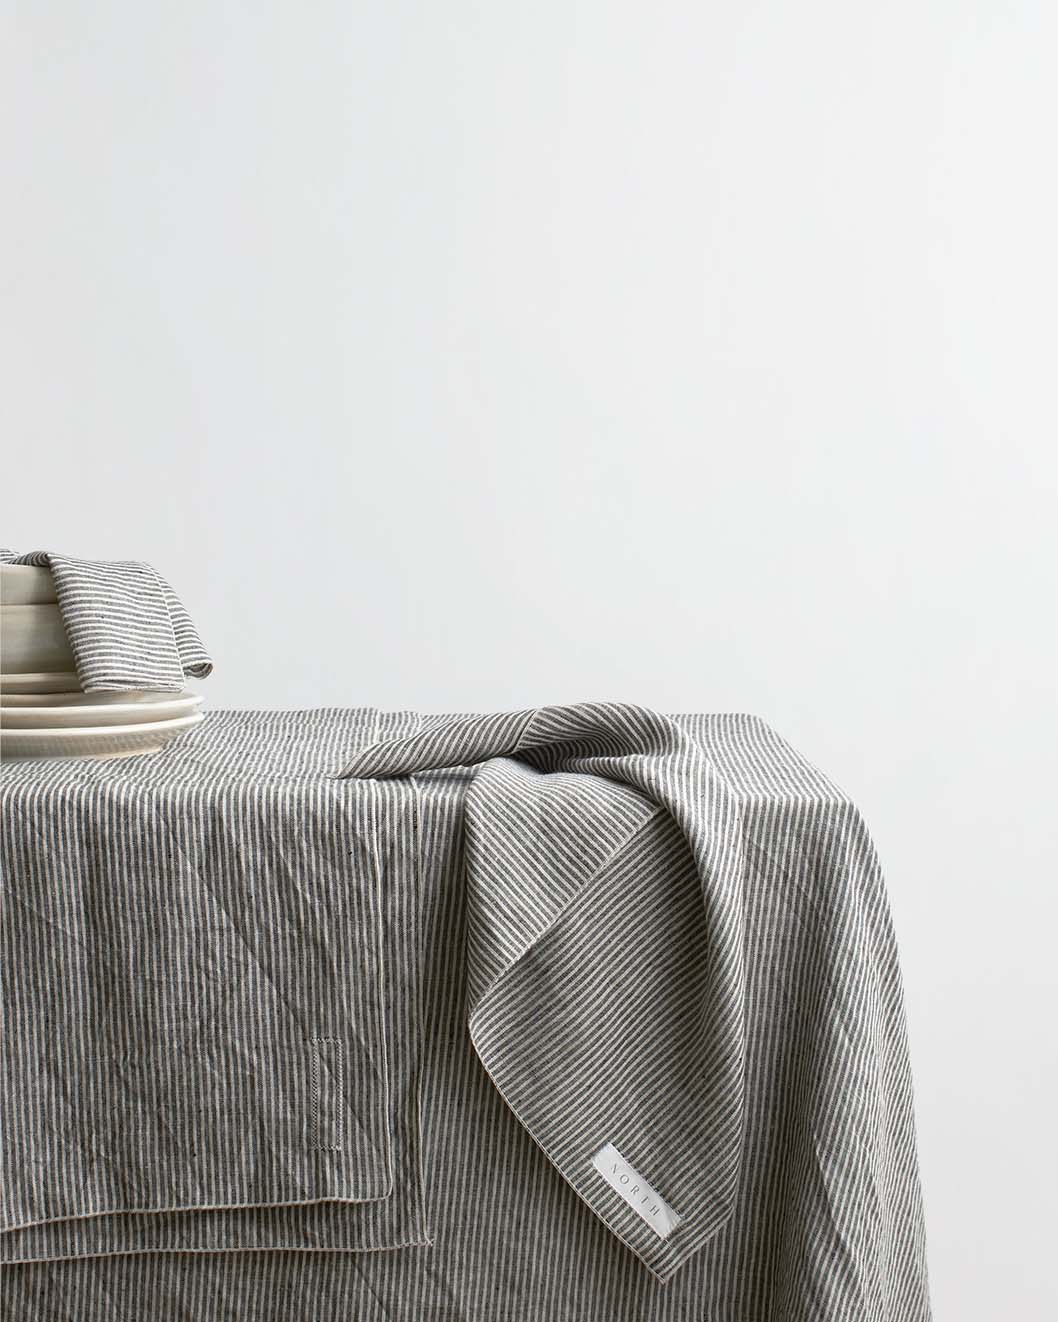 Dark Grey & Oatmeal Striped Linen Tablecloth with Natural Edge Trim